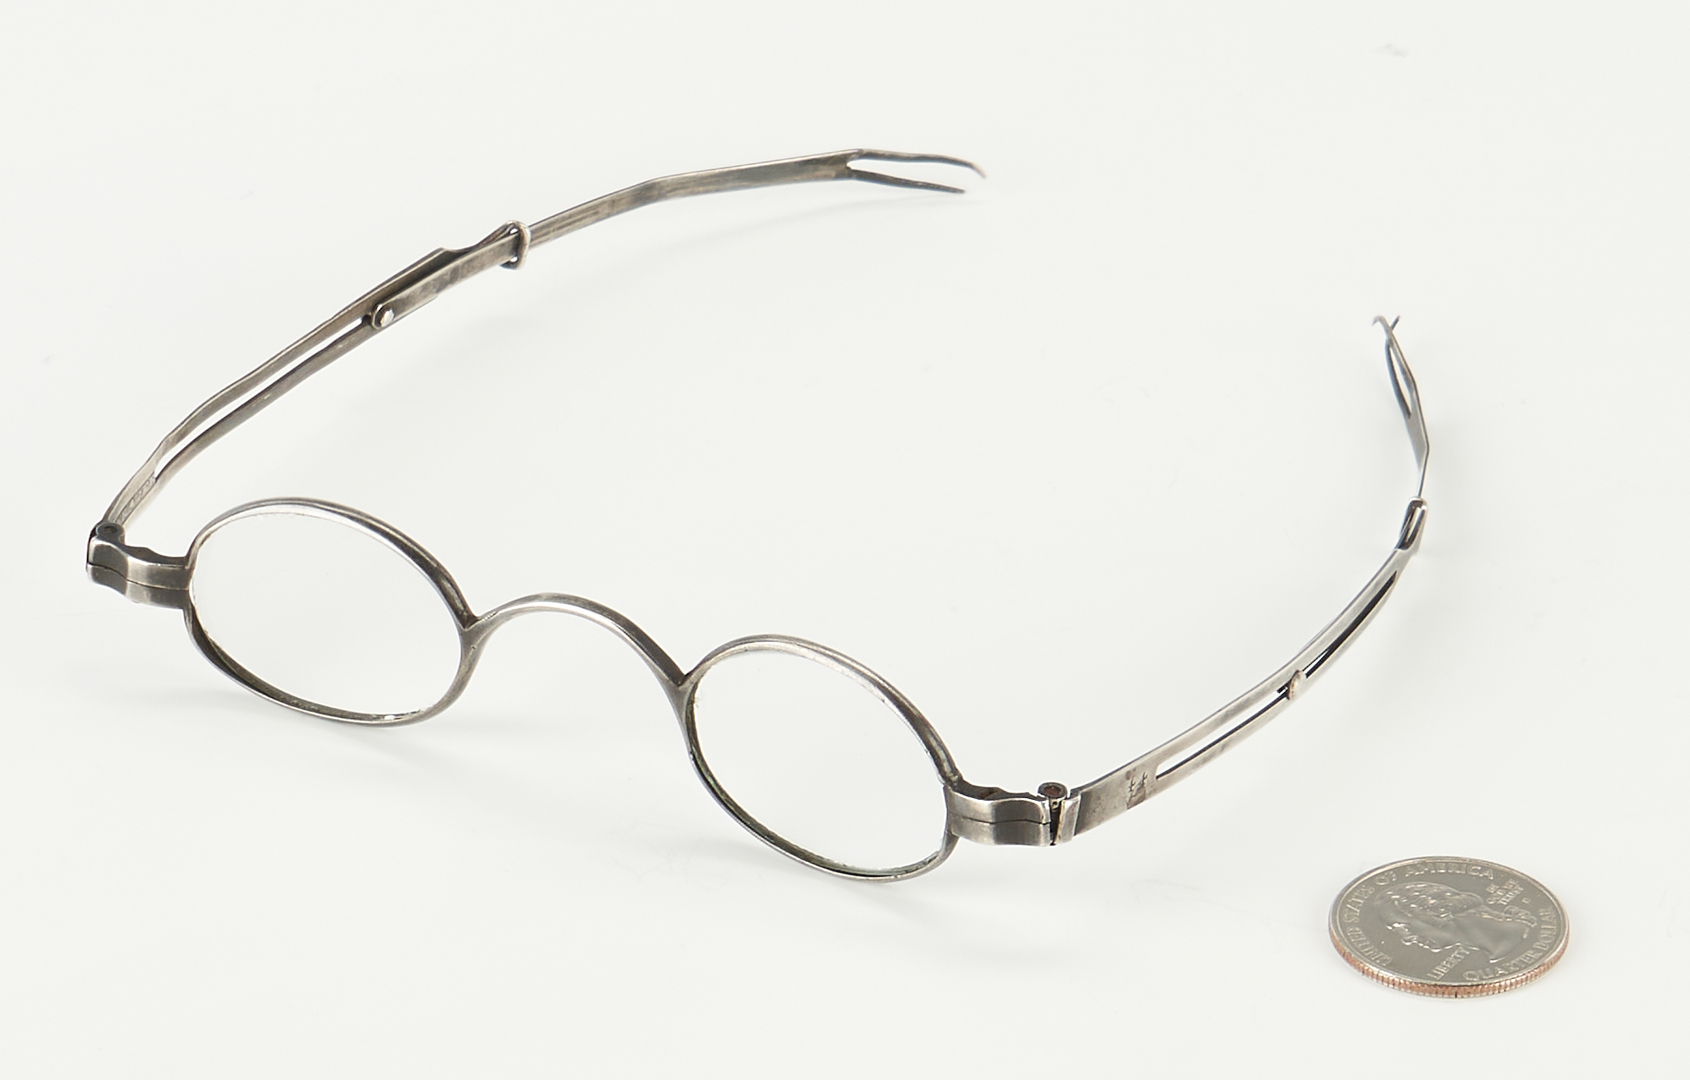 Lot 124: Kentucky Coin Silver Spectacles